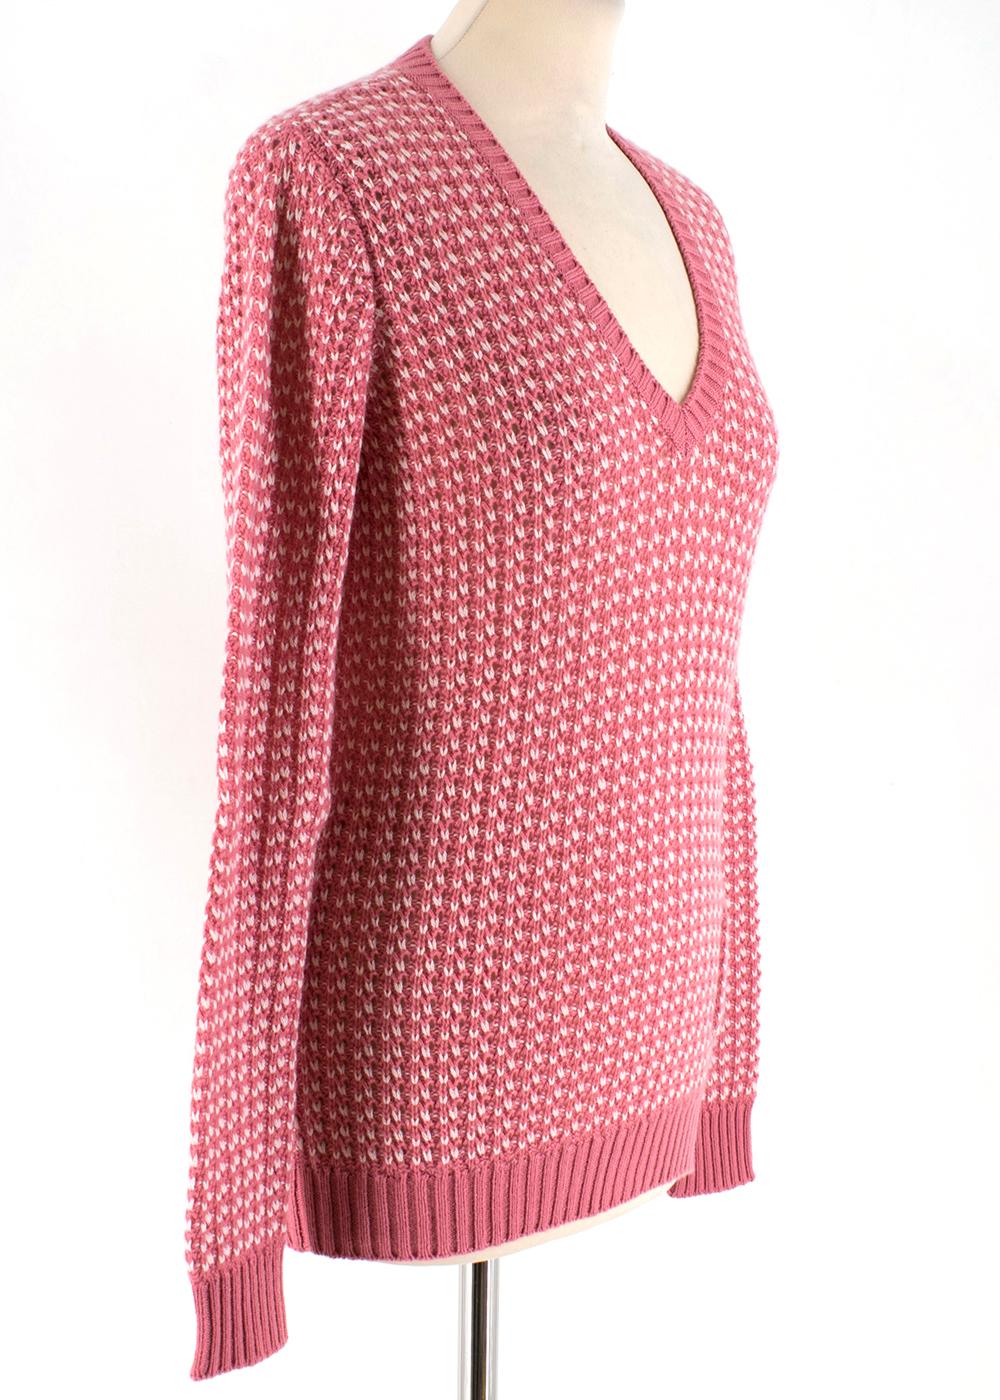 Loro Piana Pink and White Knitted Sweater 

- V Neckline 
- Straight Hemline 
- Ribbed Knit to cuffs, neckline and hemline 
- Small pocket detail to bottom left 

Made in Italy 
Measurements are taken laying flat, seam to seam. 

Length: